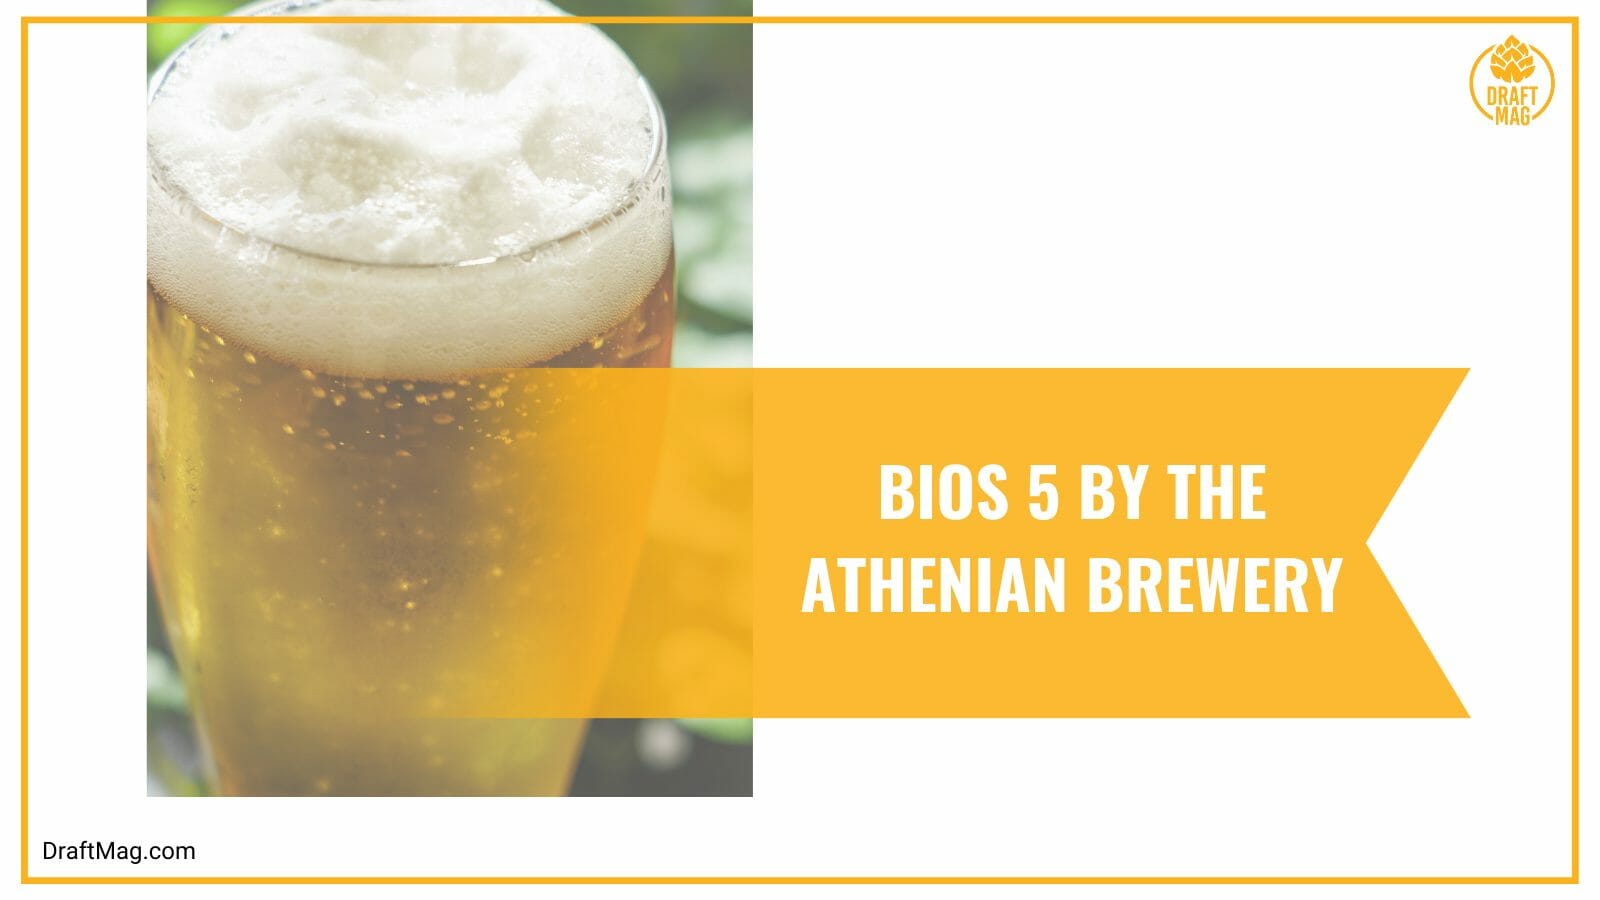 Bios by the athenian brewery